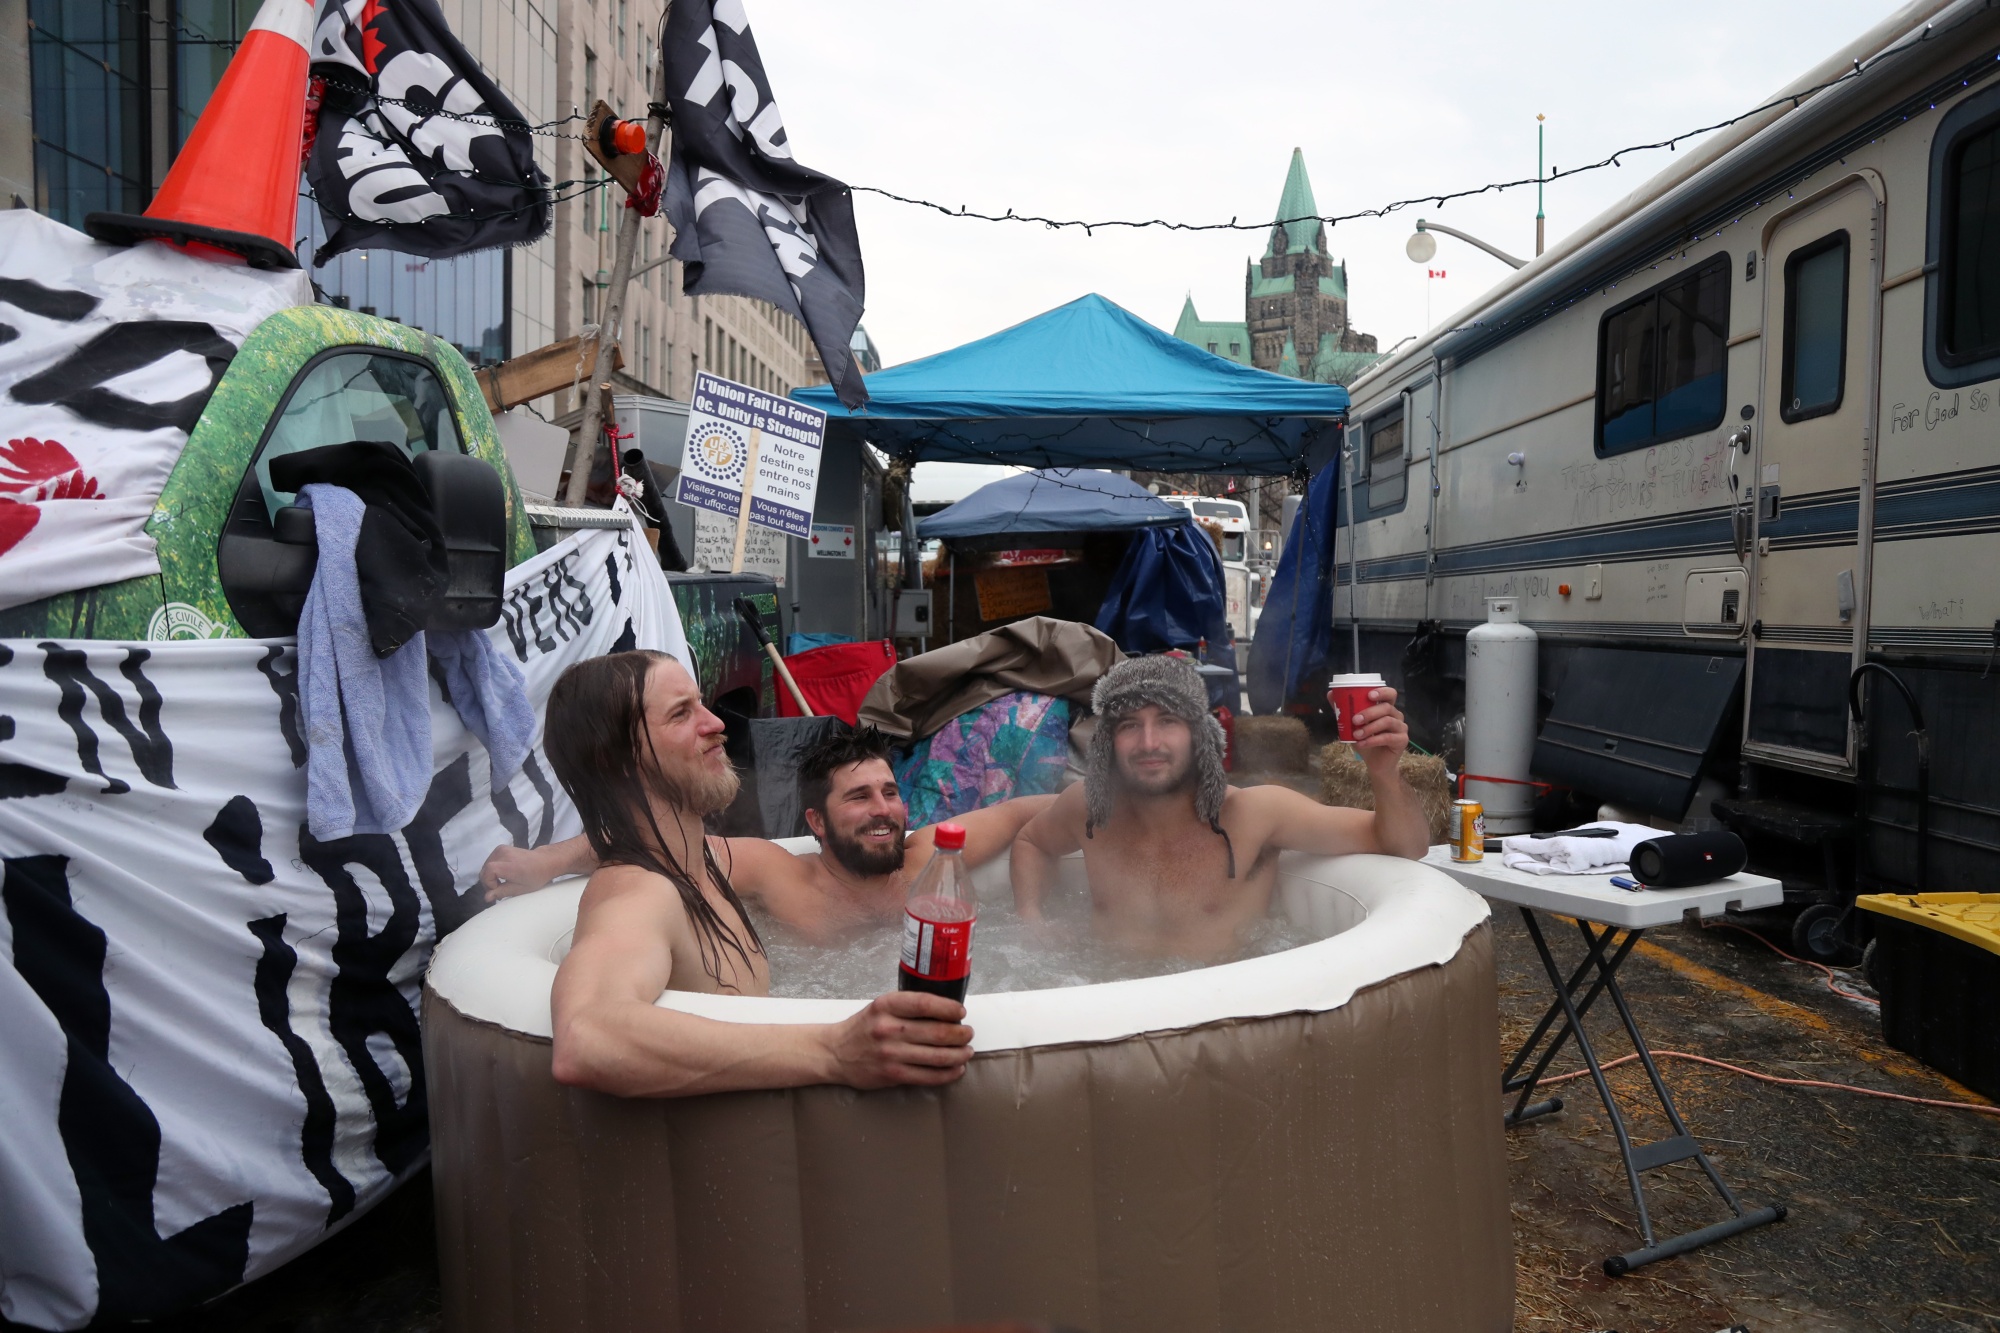 Protesters sit in a hot tub along the main avenue in front of the parliament buildings in Ottawa on Feb. 16.